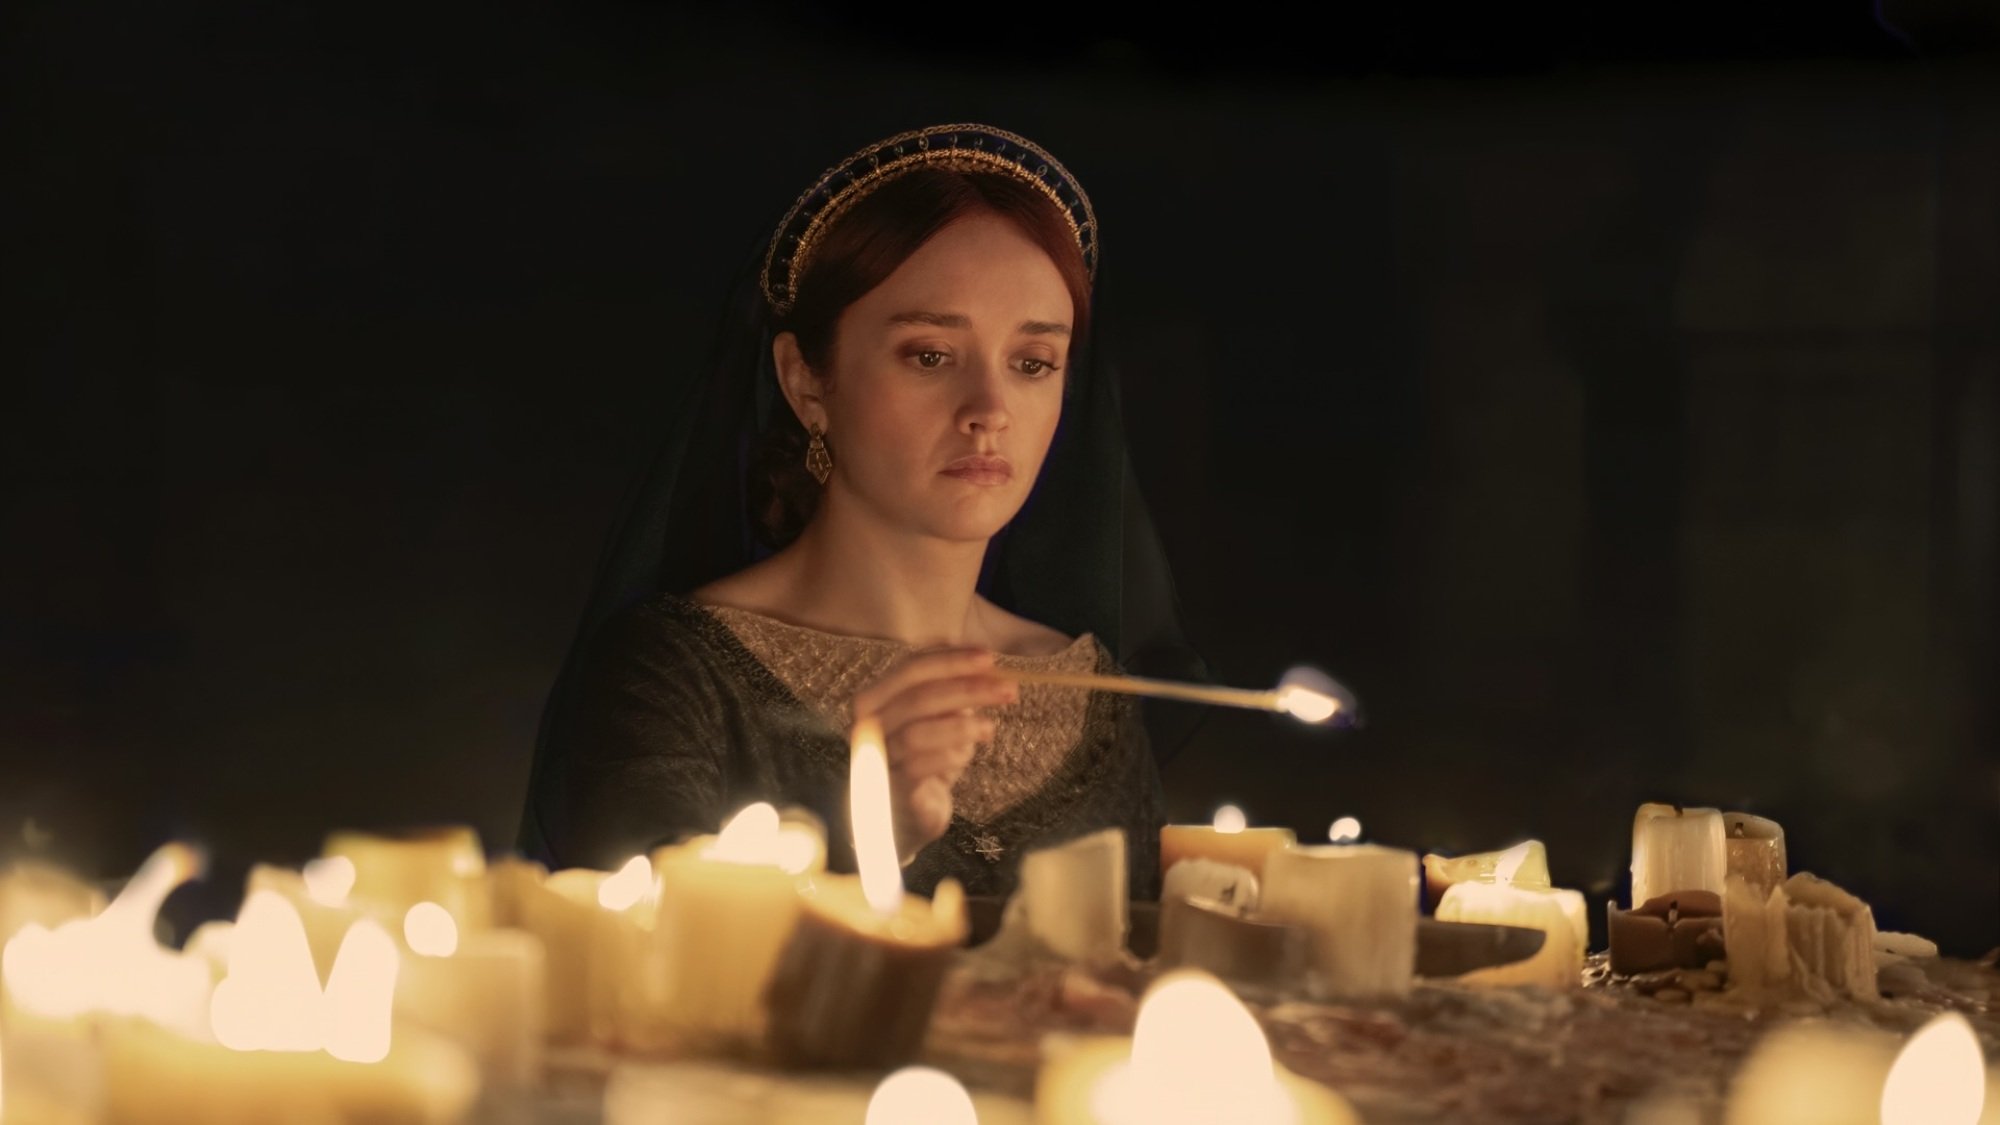 Alicent from "House of the Dragon" lights candles at an altar, wearing a green dress and black veiled headdress.